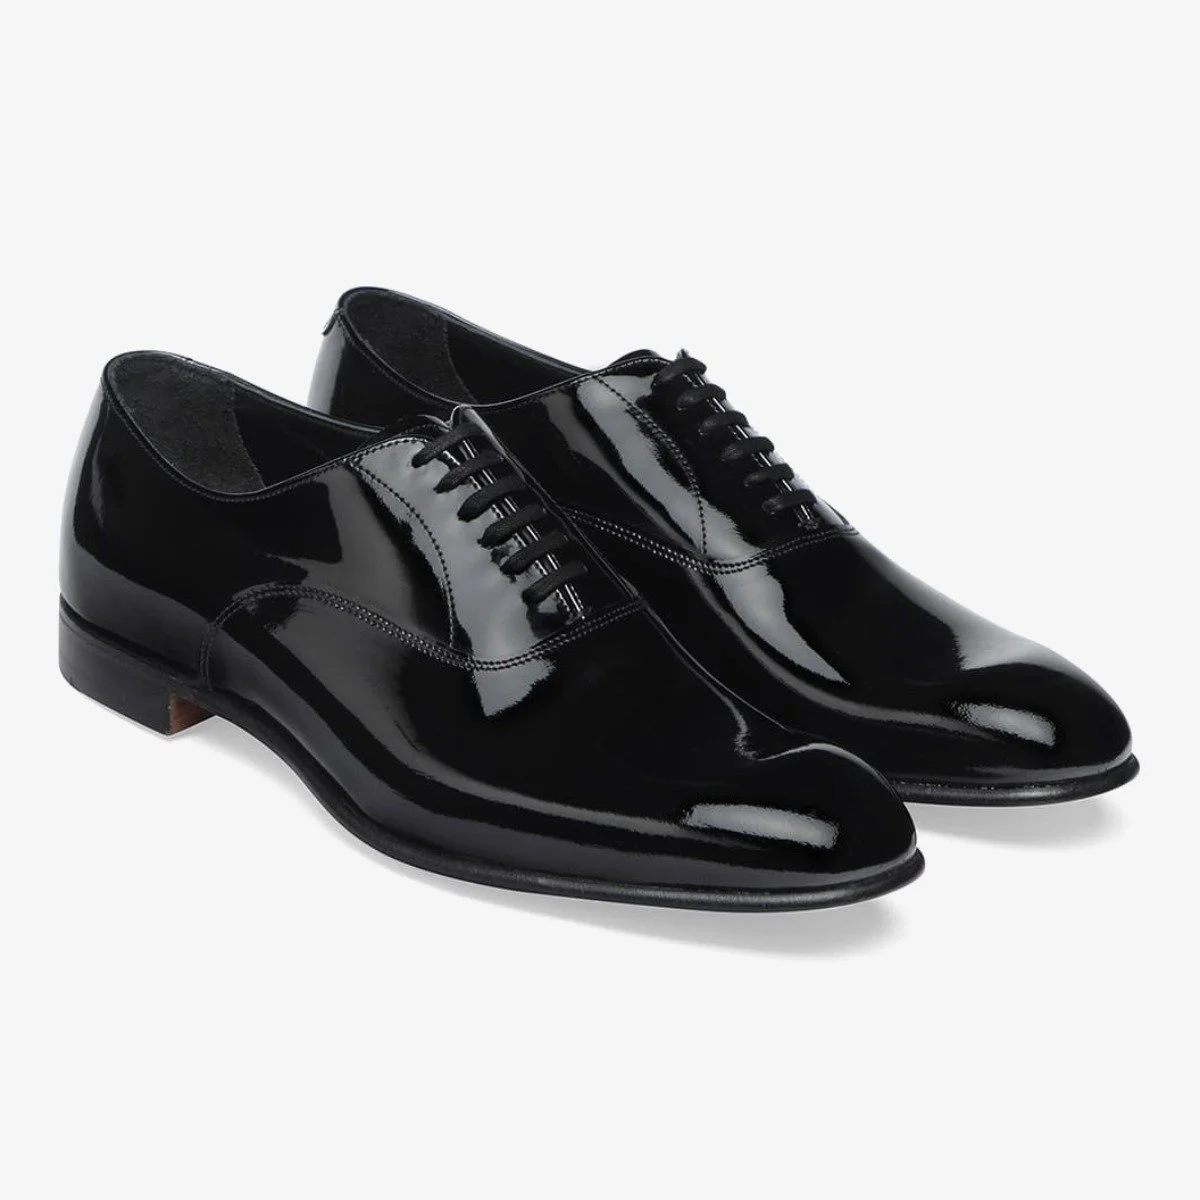 Cheaney Kelly black patent leather tuxedo men's oxford shoes